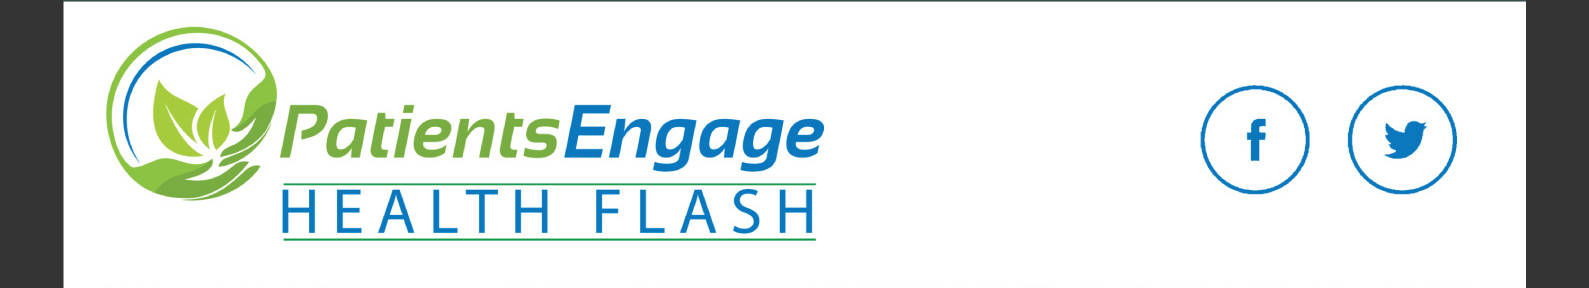 Patients Engage Health flash 